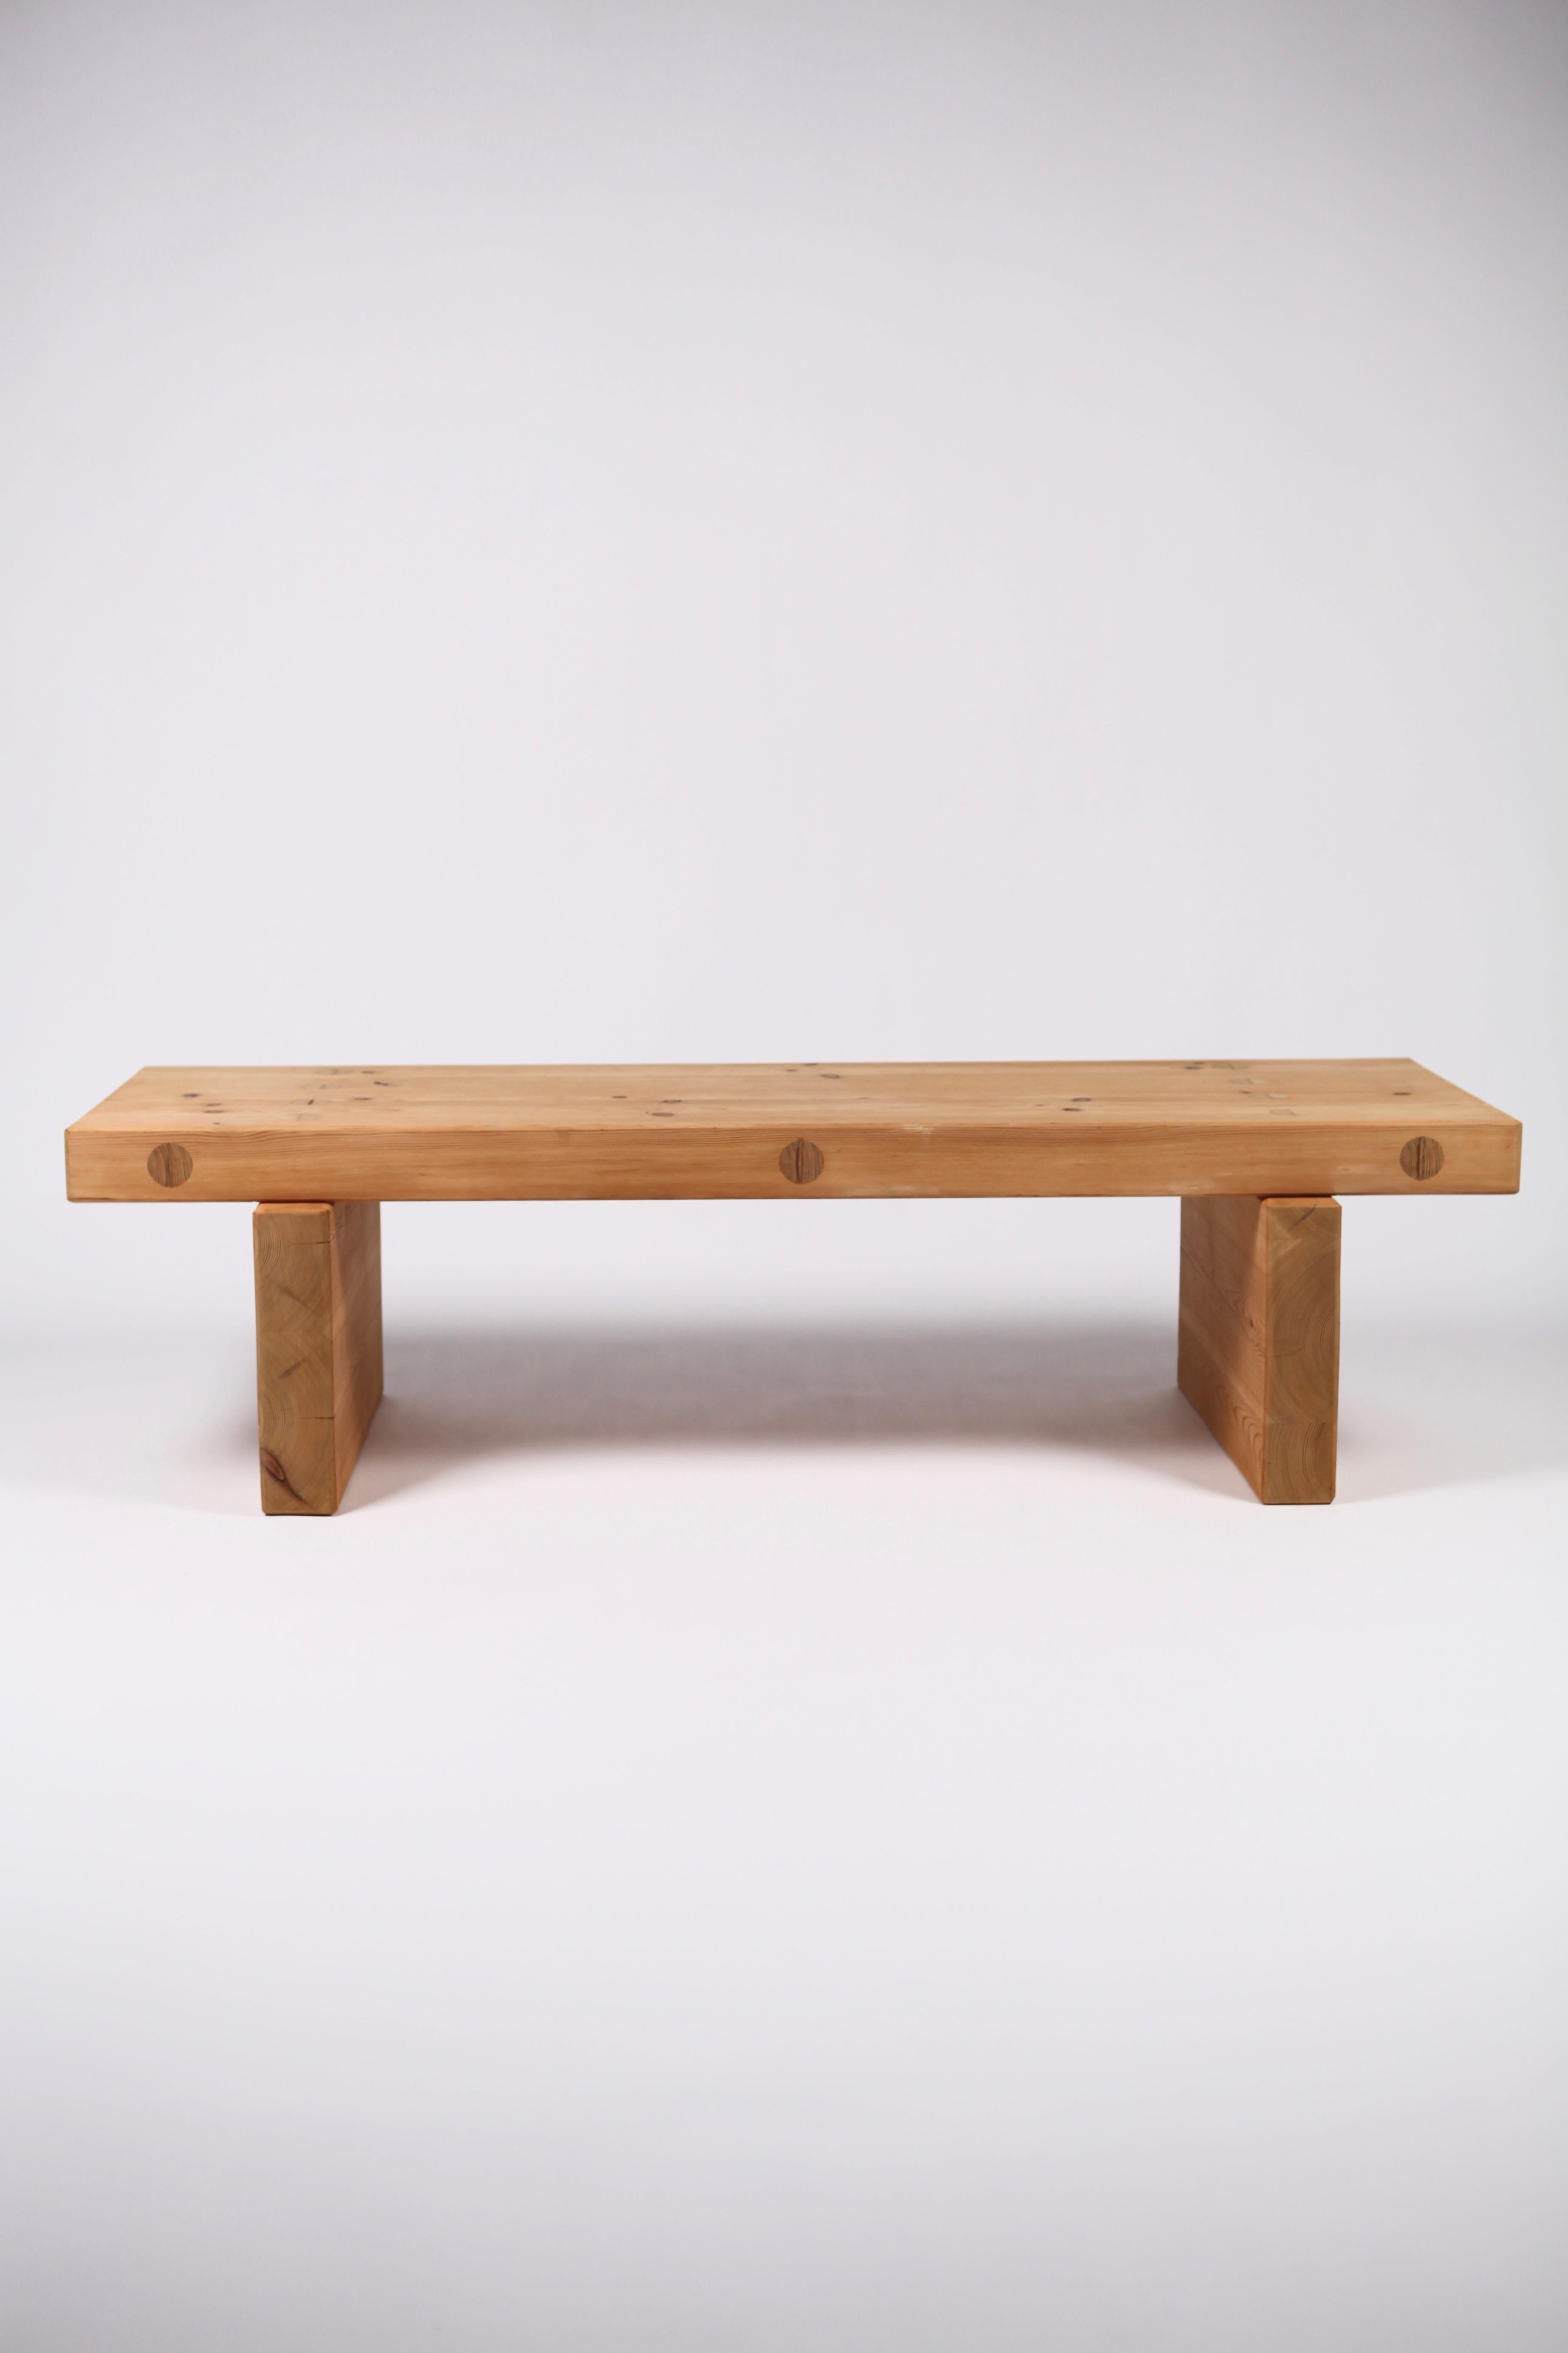 A timeless Scandinavian Modern bench or coffee table in solid thick pine by Roland Wilhelmsson, executed in Sweden, 1970.
Characteristic visible wood joints and great craftsmanship.
Signed to the underside.


         